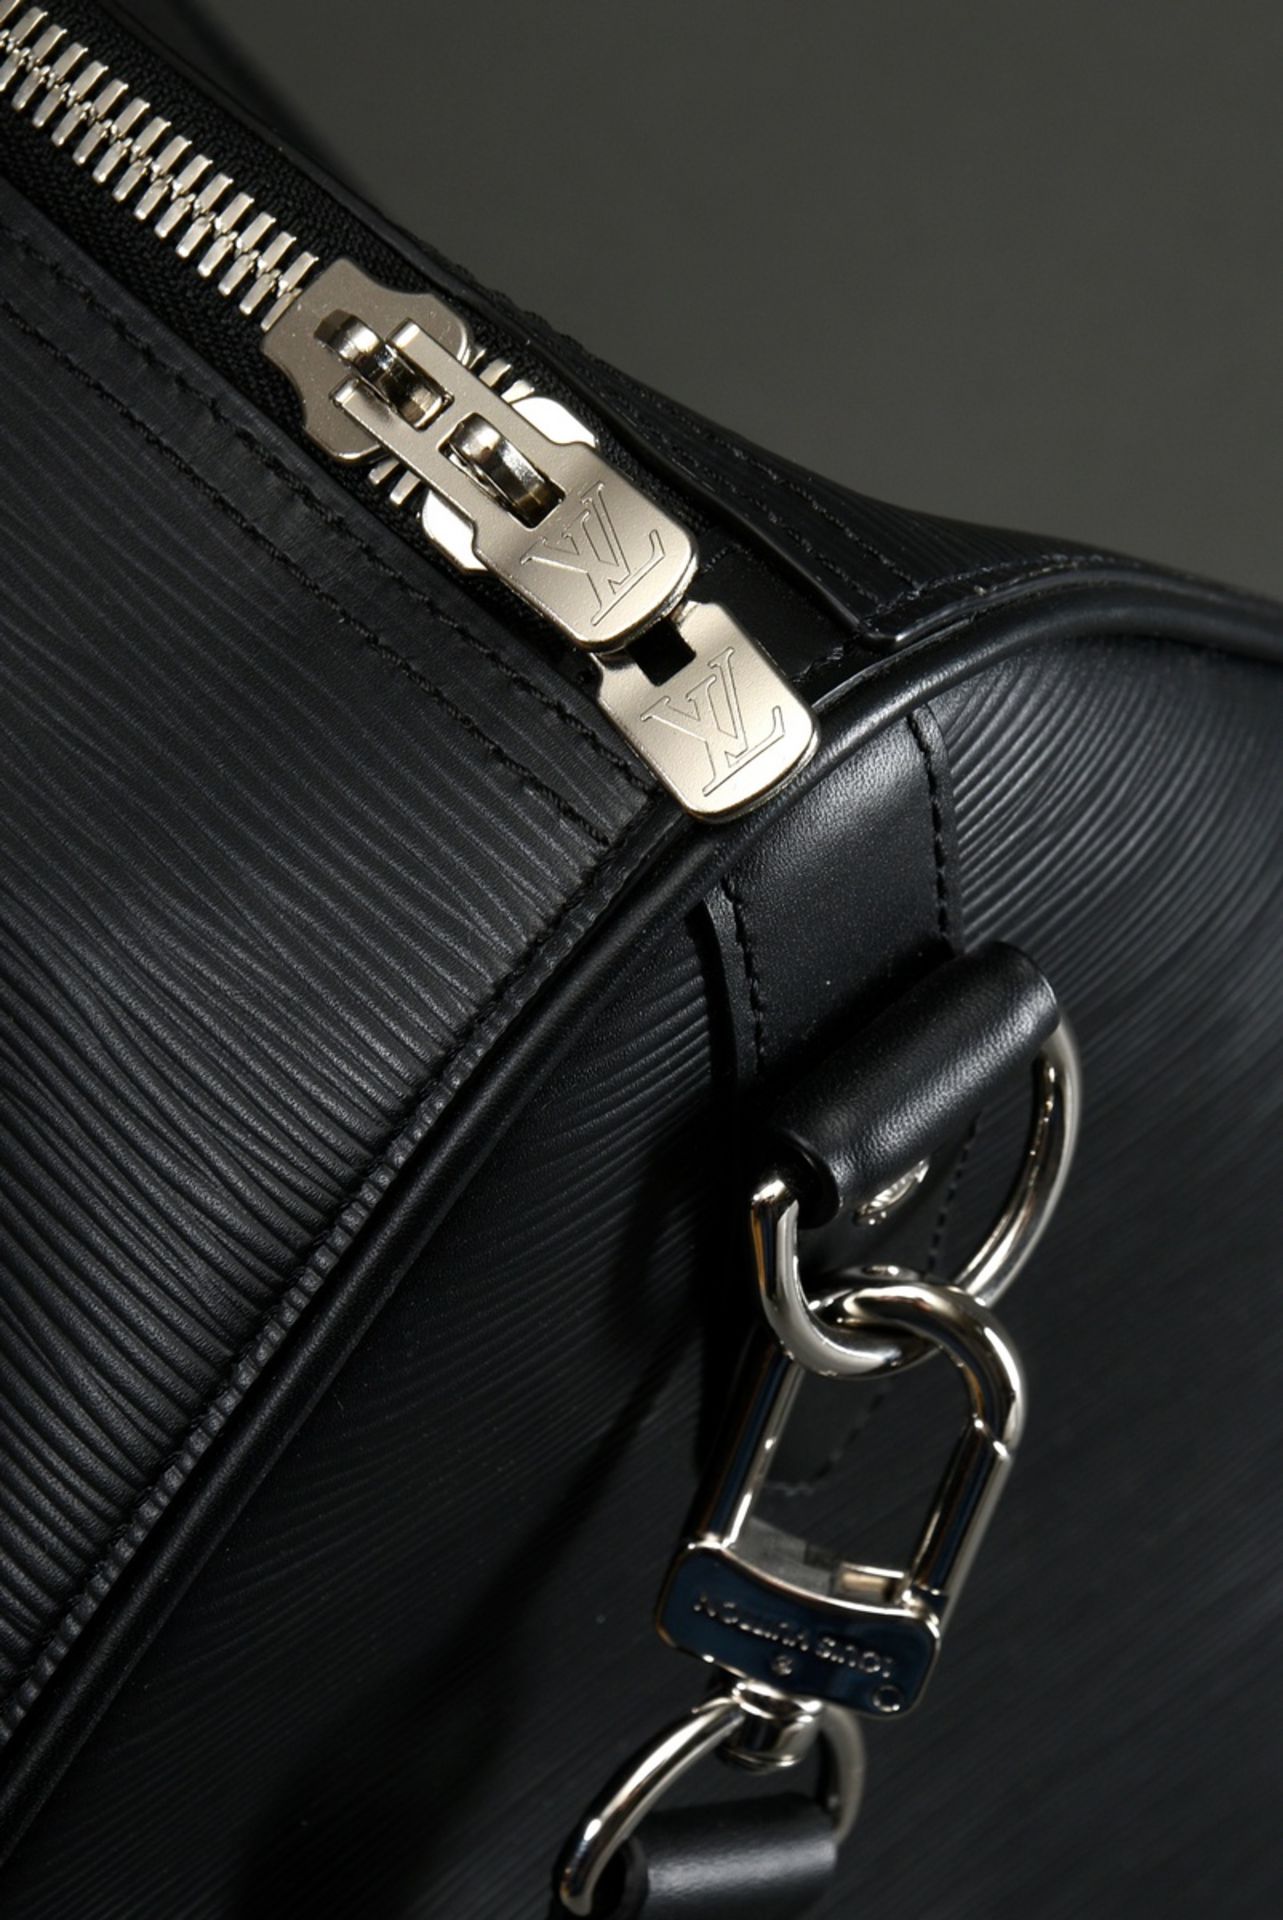 Louis Vuitton "Keepall 50" in Epi black, Damier graphite and raised Brand lettering on blue and whi - Image 5 of 9